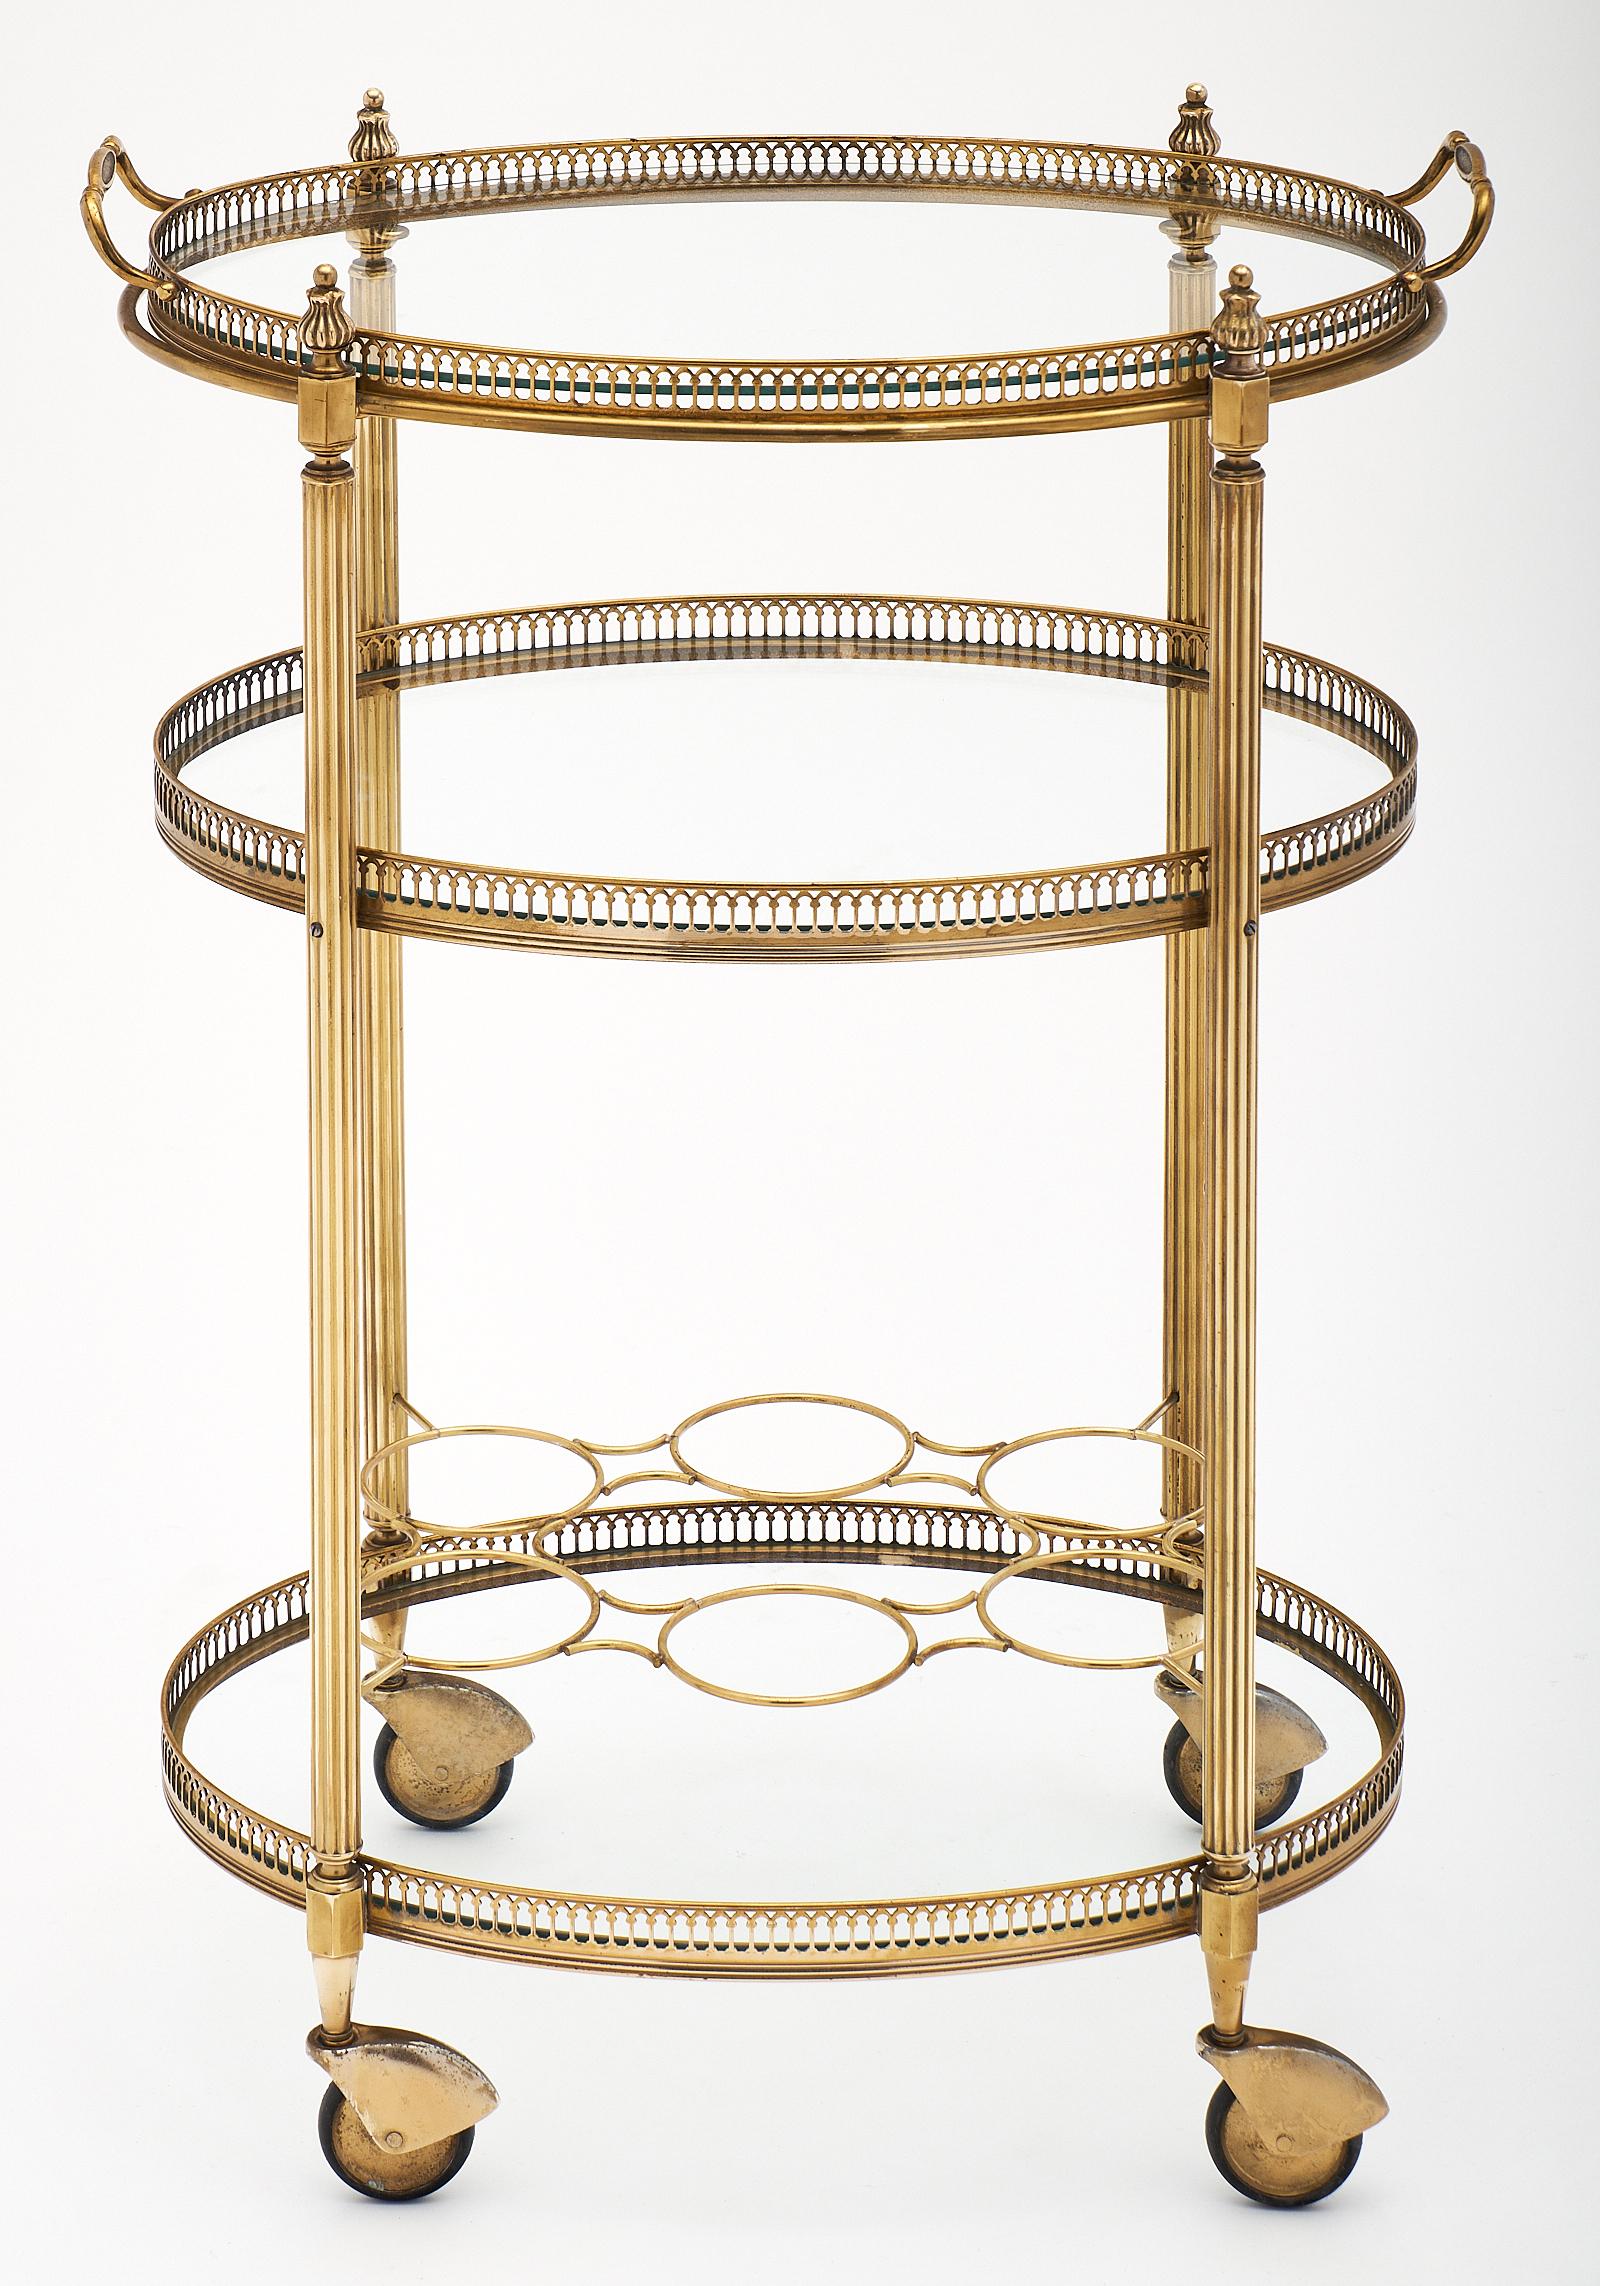 French Art Deco period brass bar cart featuring three glass shelves. Each tier has a brass gallery, and the bottom shelf has a bottle holder. The top is a detachable tray for use while entertaining! It is on the original casters, both functional and